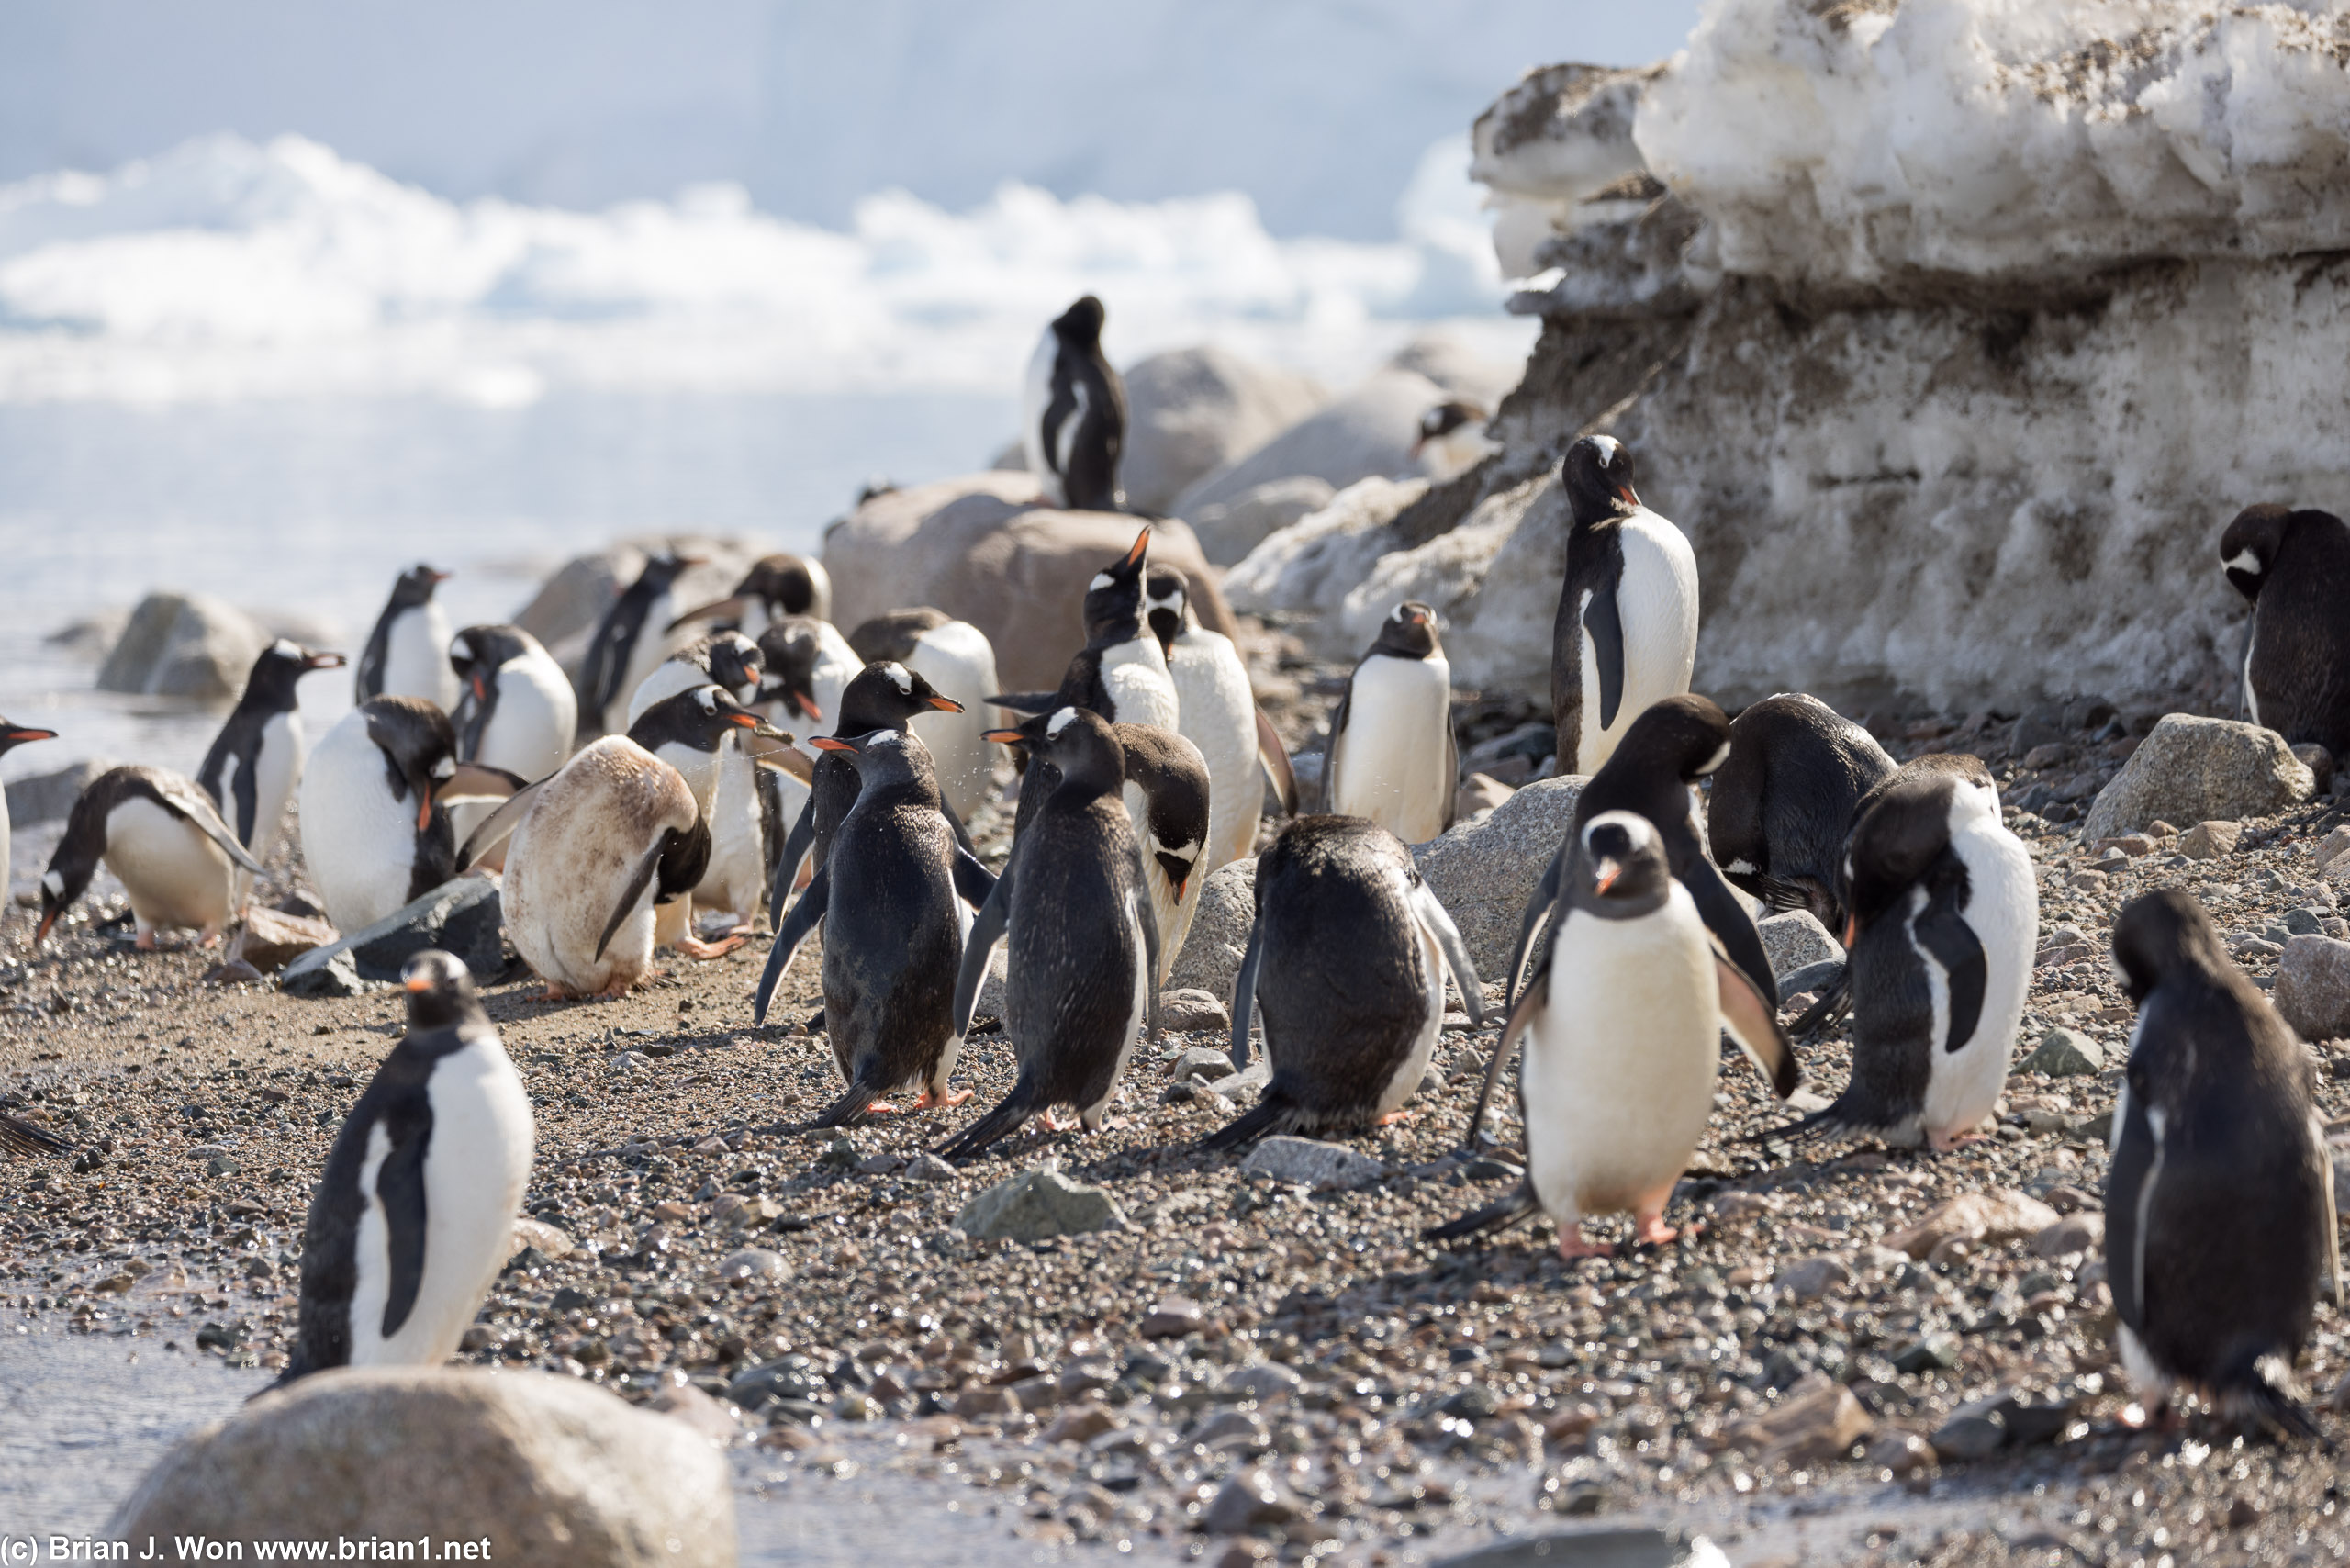 Many gentoo penguins in the water and on the beach.